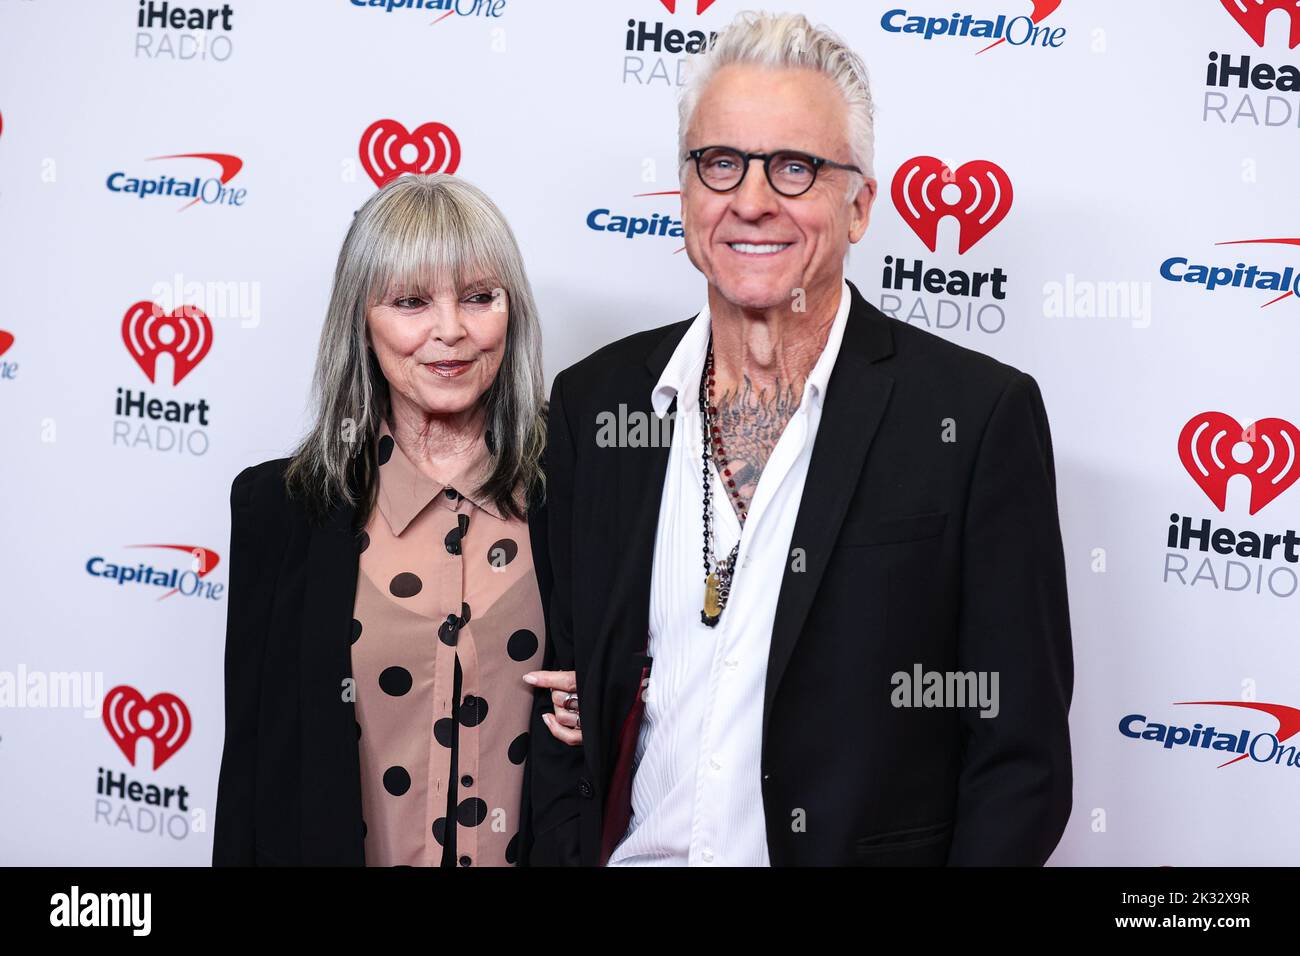 Las Vegas, United States. 23rd Sep, 2022. LAS VEGAS, NEVADA, USA - SEPTEMBER 23: Pat Benatar and Neil Giraldo pose in the press room at the 2022 iHeartRadio Music Festival - Night 1 held at the T-Mobile Arena on September 23, 2022 in Las Vegas, Nevada, United States. (Photo by Xavier Collin/Image Press Agency) Credit: Image Press Agency/Alamy Live News Stock Photo